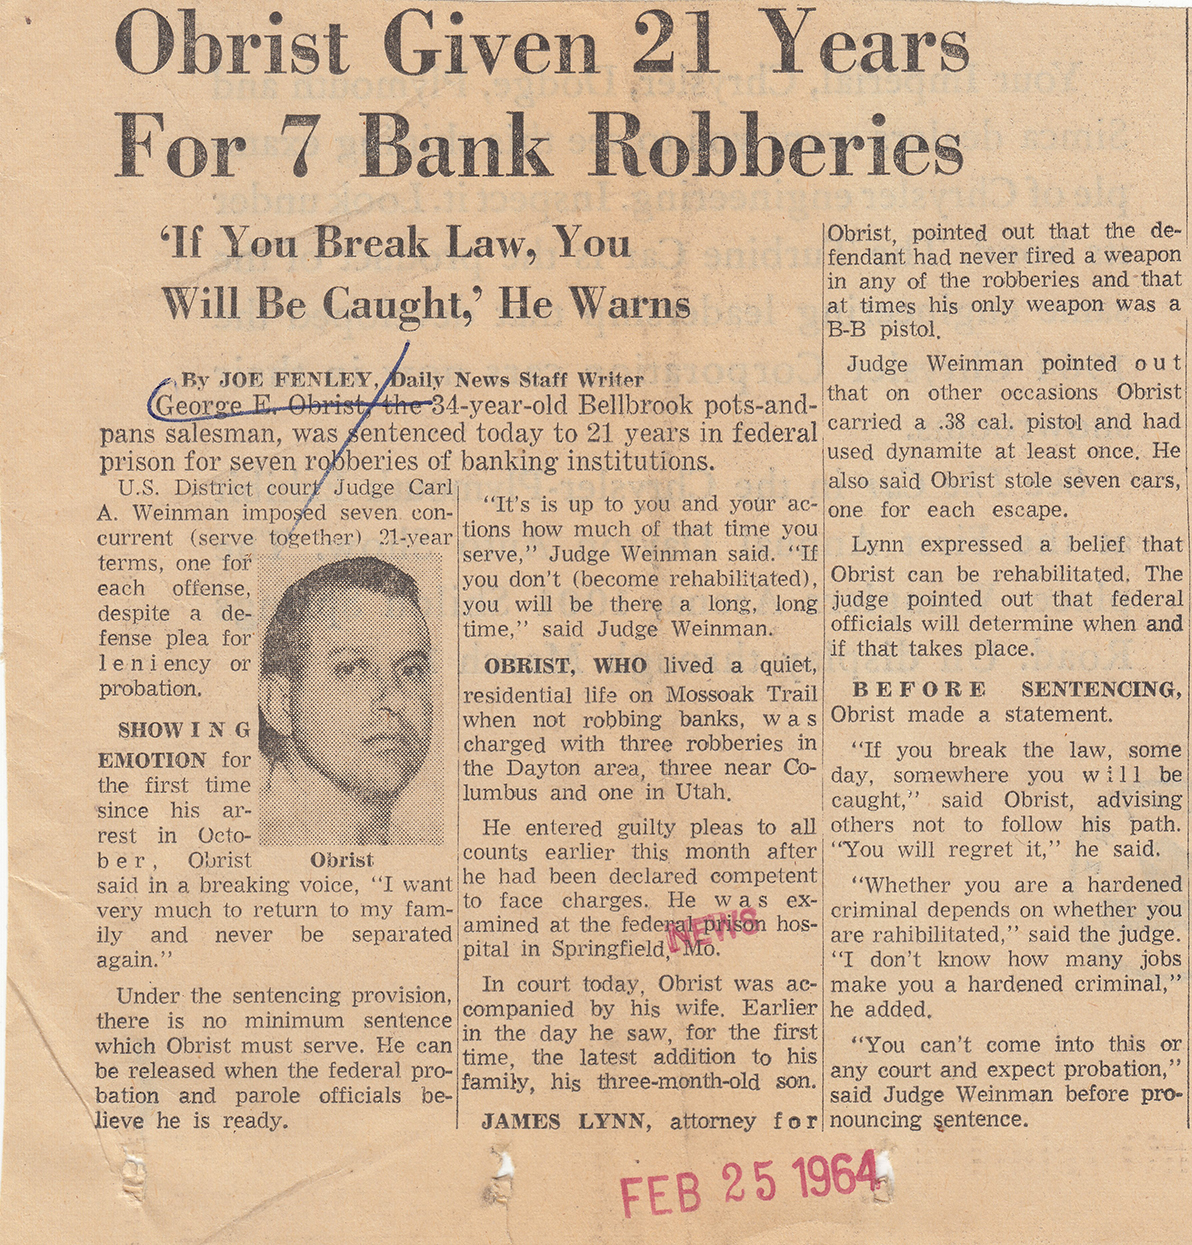 Obrist Given 21 Years for 7 Bank Robberies, Dayton Daily News, 25 Feb 1964